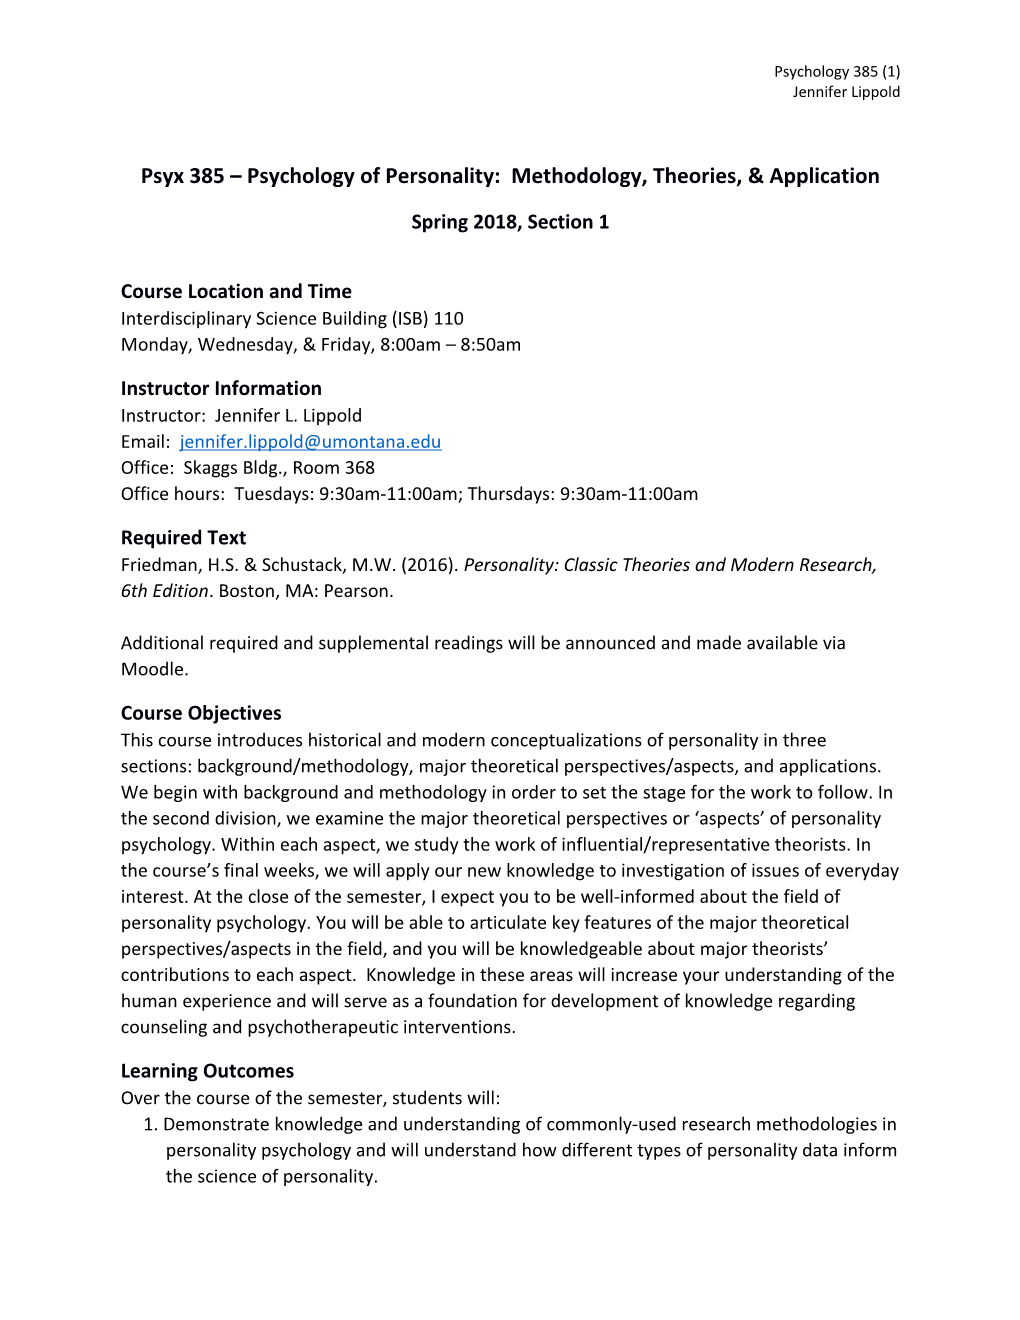 Psyx 385 Psychology of Personality: Methodology, Theories, & Application